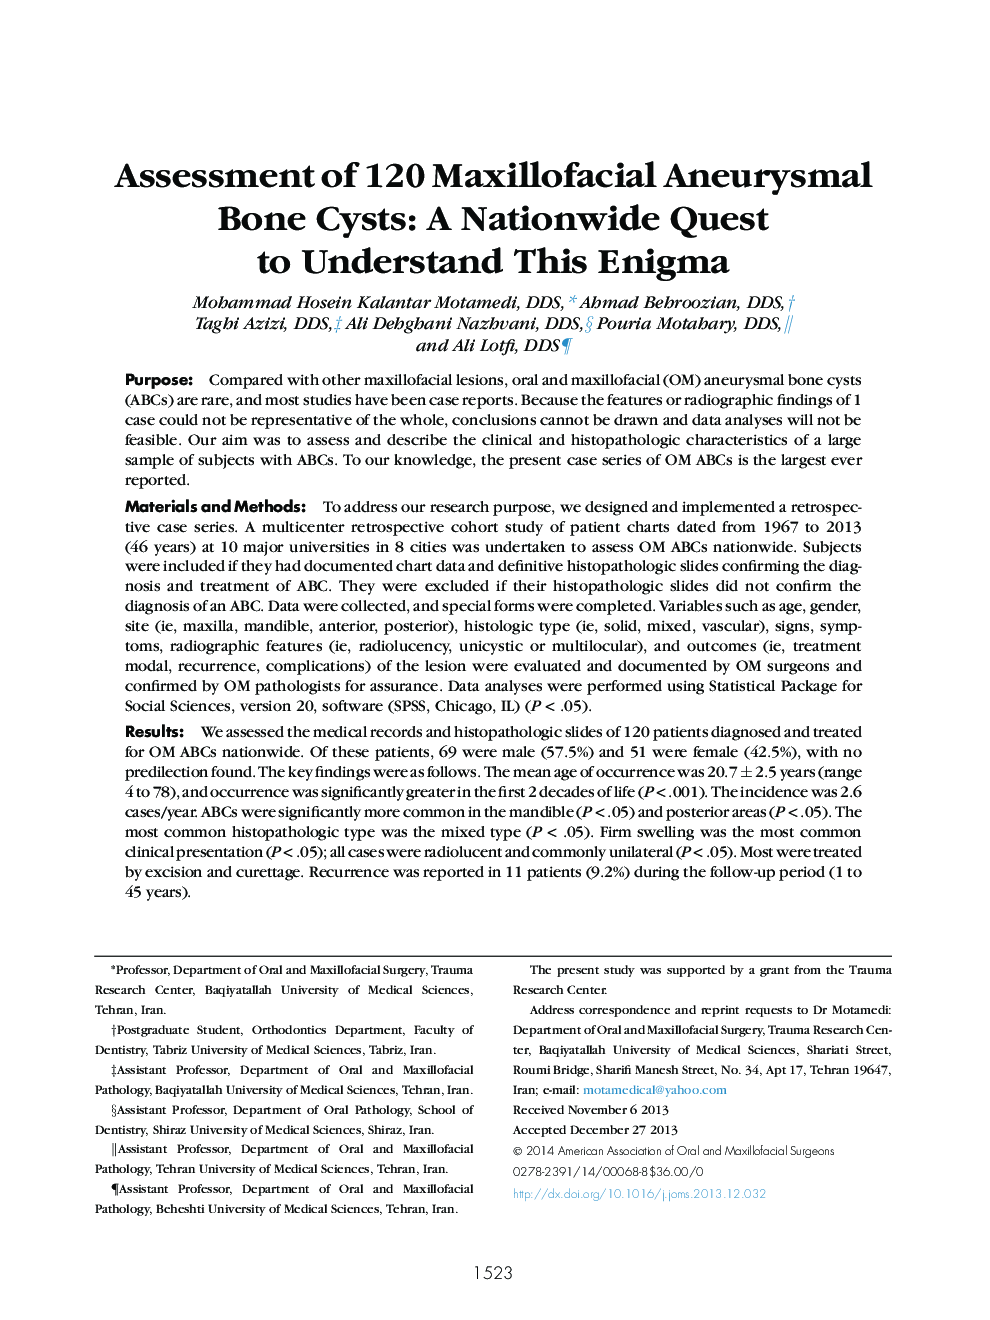 Assessment of 120 Maxillofacial Aneurysmal Bone Cysts: A Nationwide Quest to Understand This Enigma